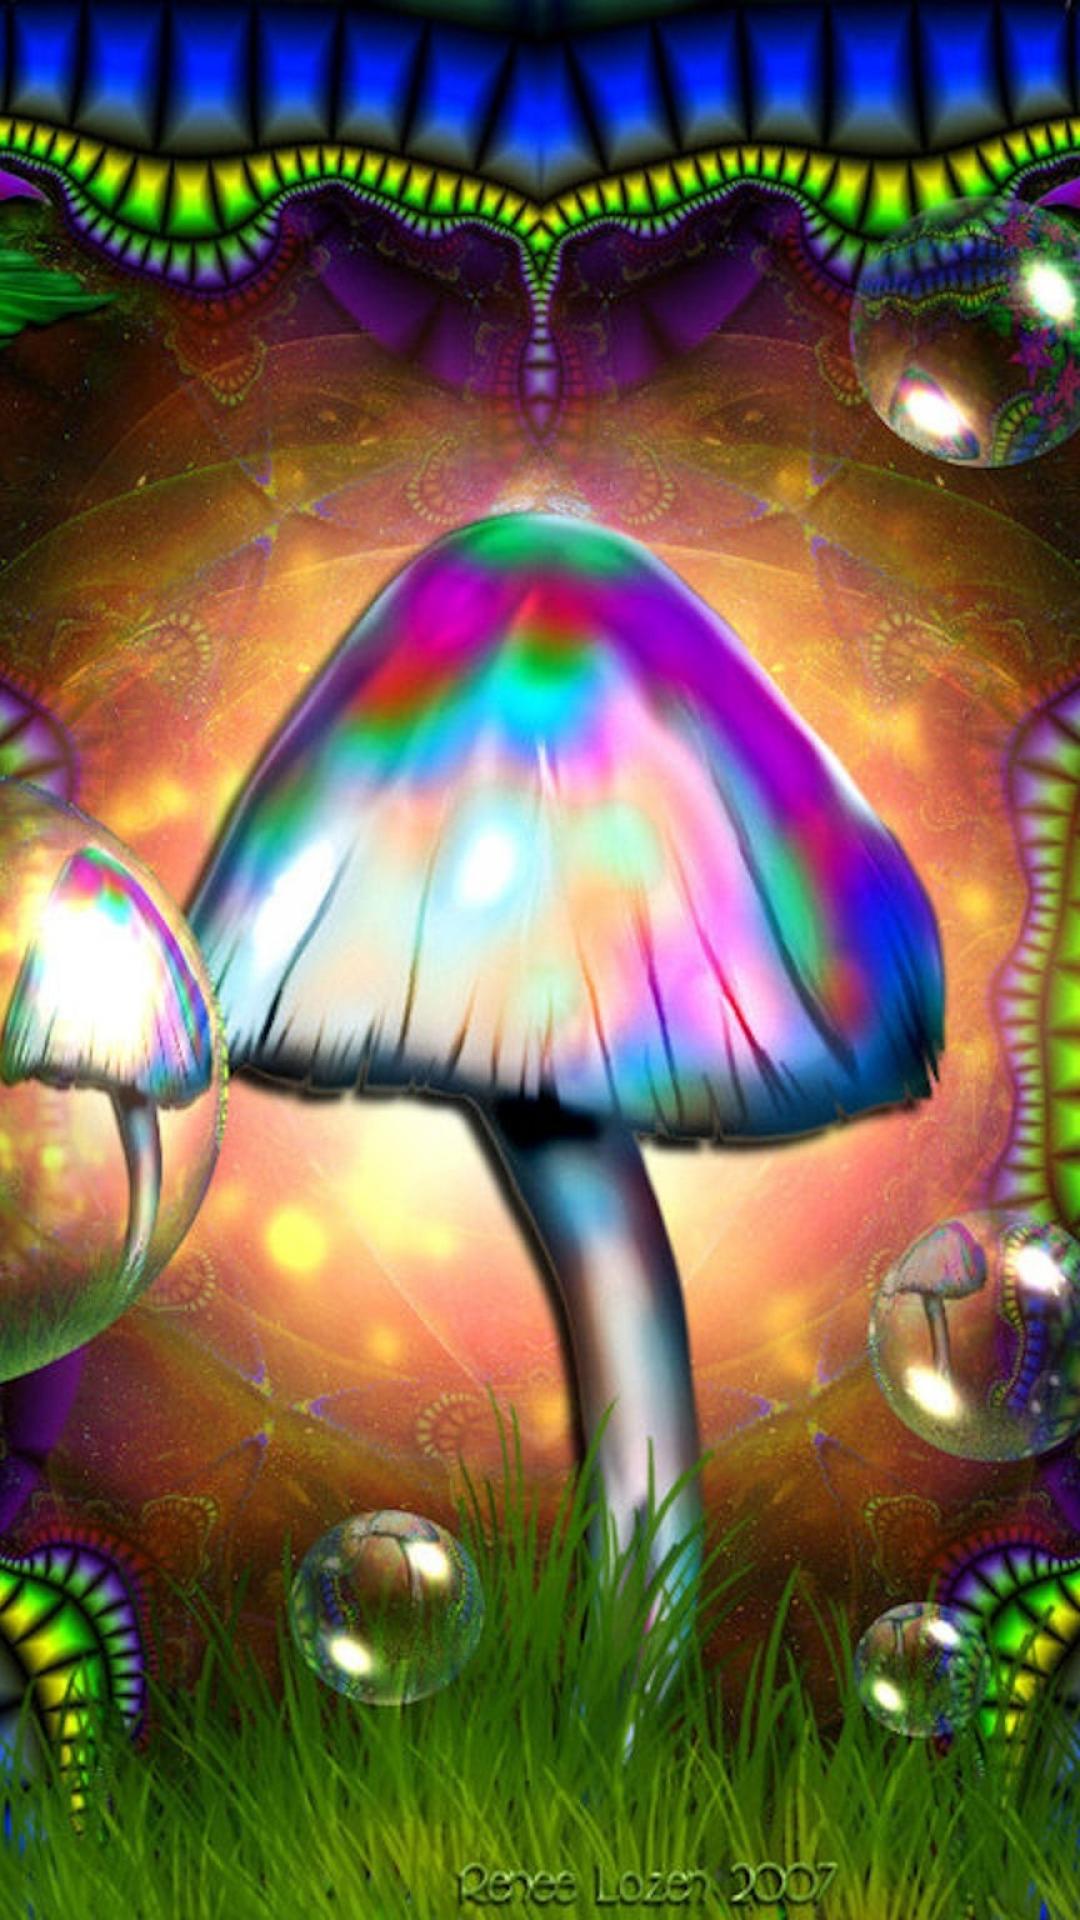 different wallpapers for mobile,mushroom,light,psychedelic art,organism,glass